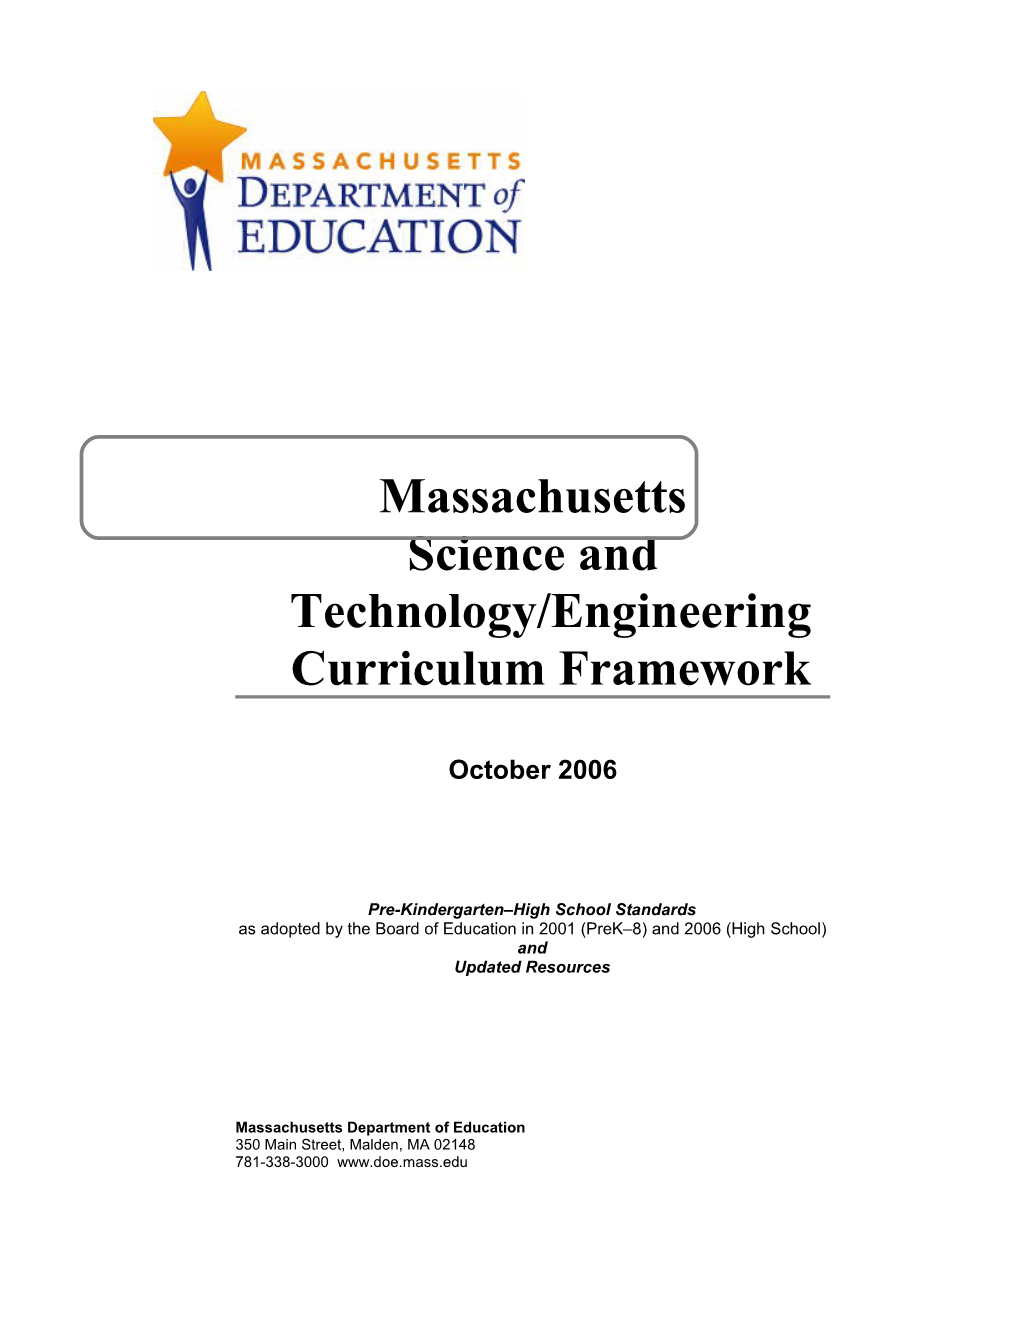 2006 Science and Technology/Engineering Curriculum Framework